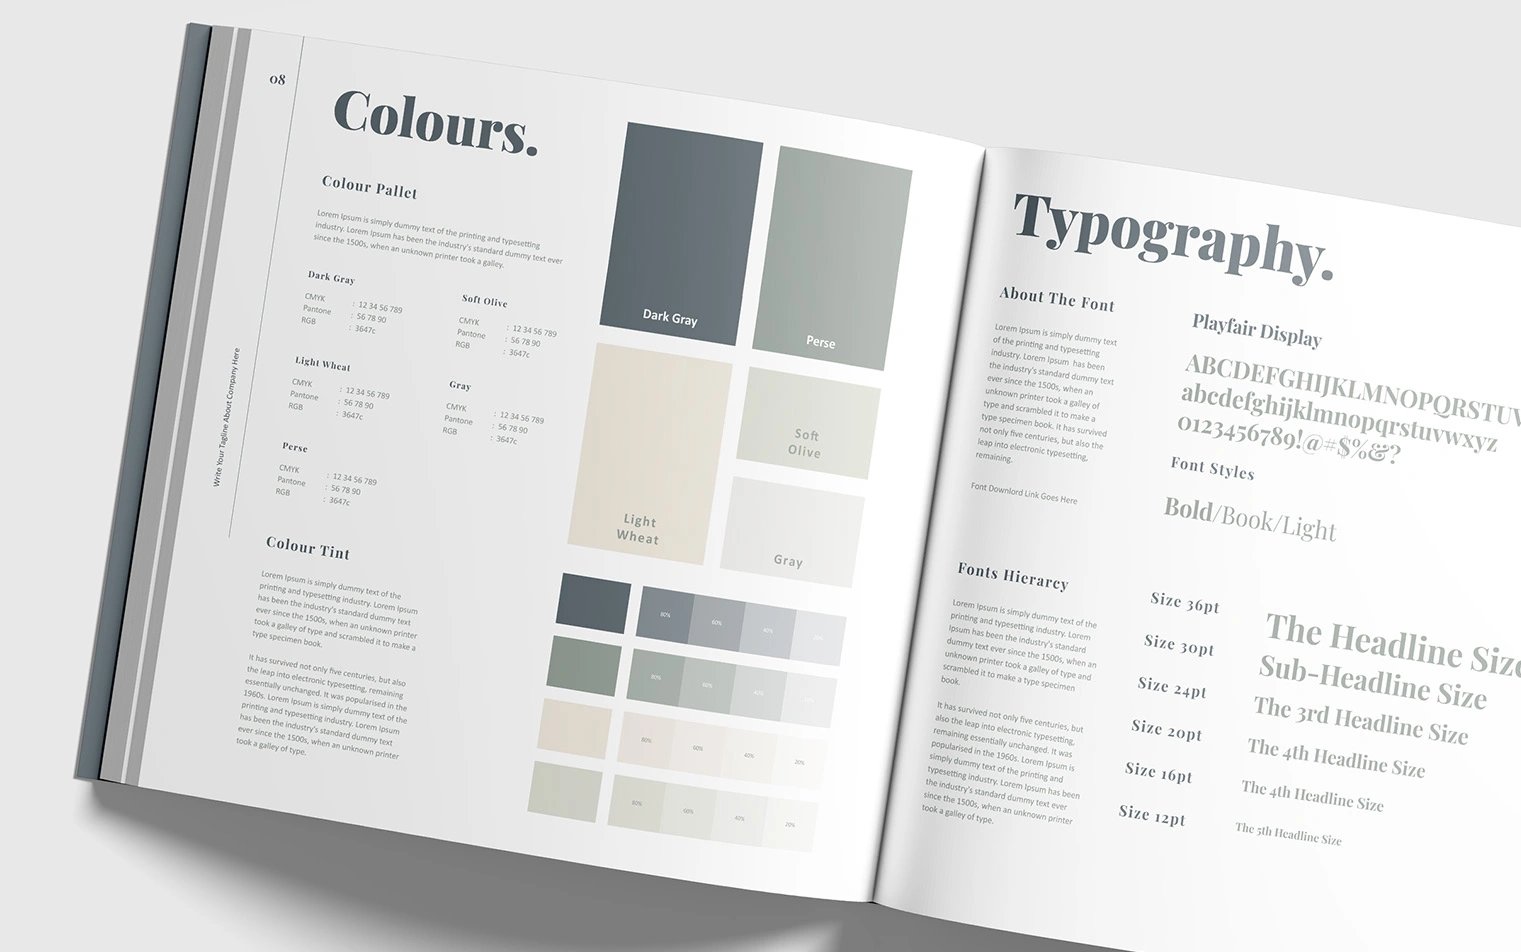 Design system book with colours and typography for a brand